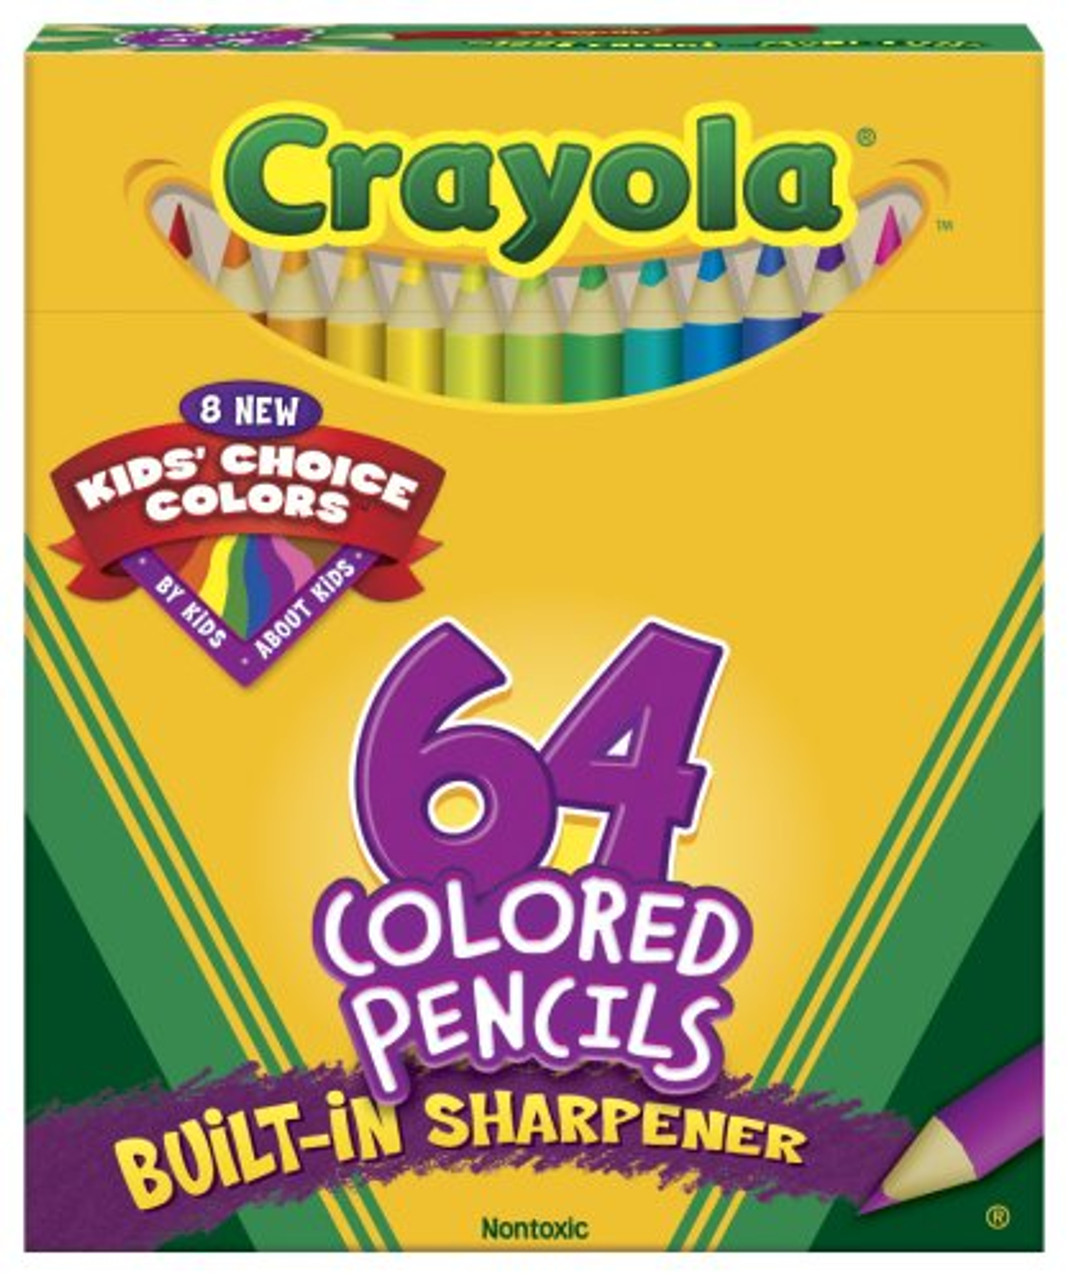 Crayola Colored Pencils 64 Count Kid's Choice Colors 